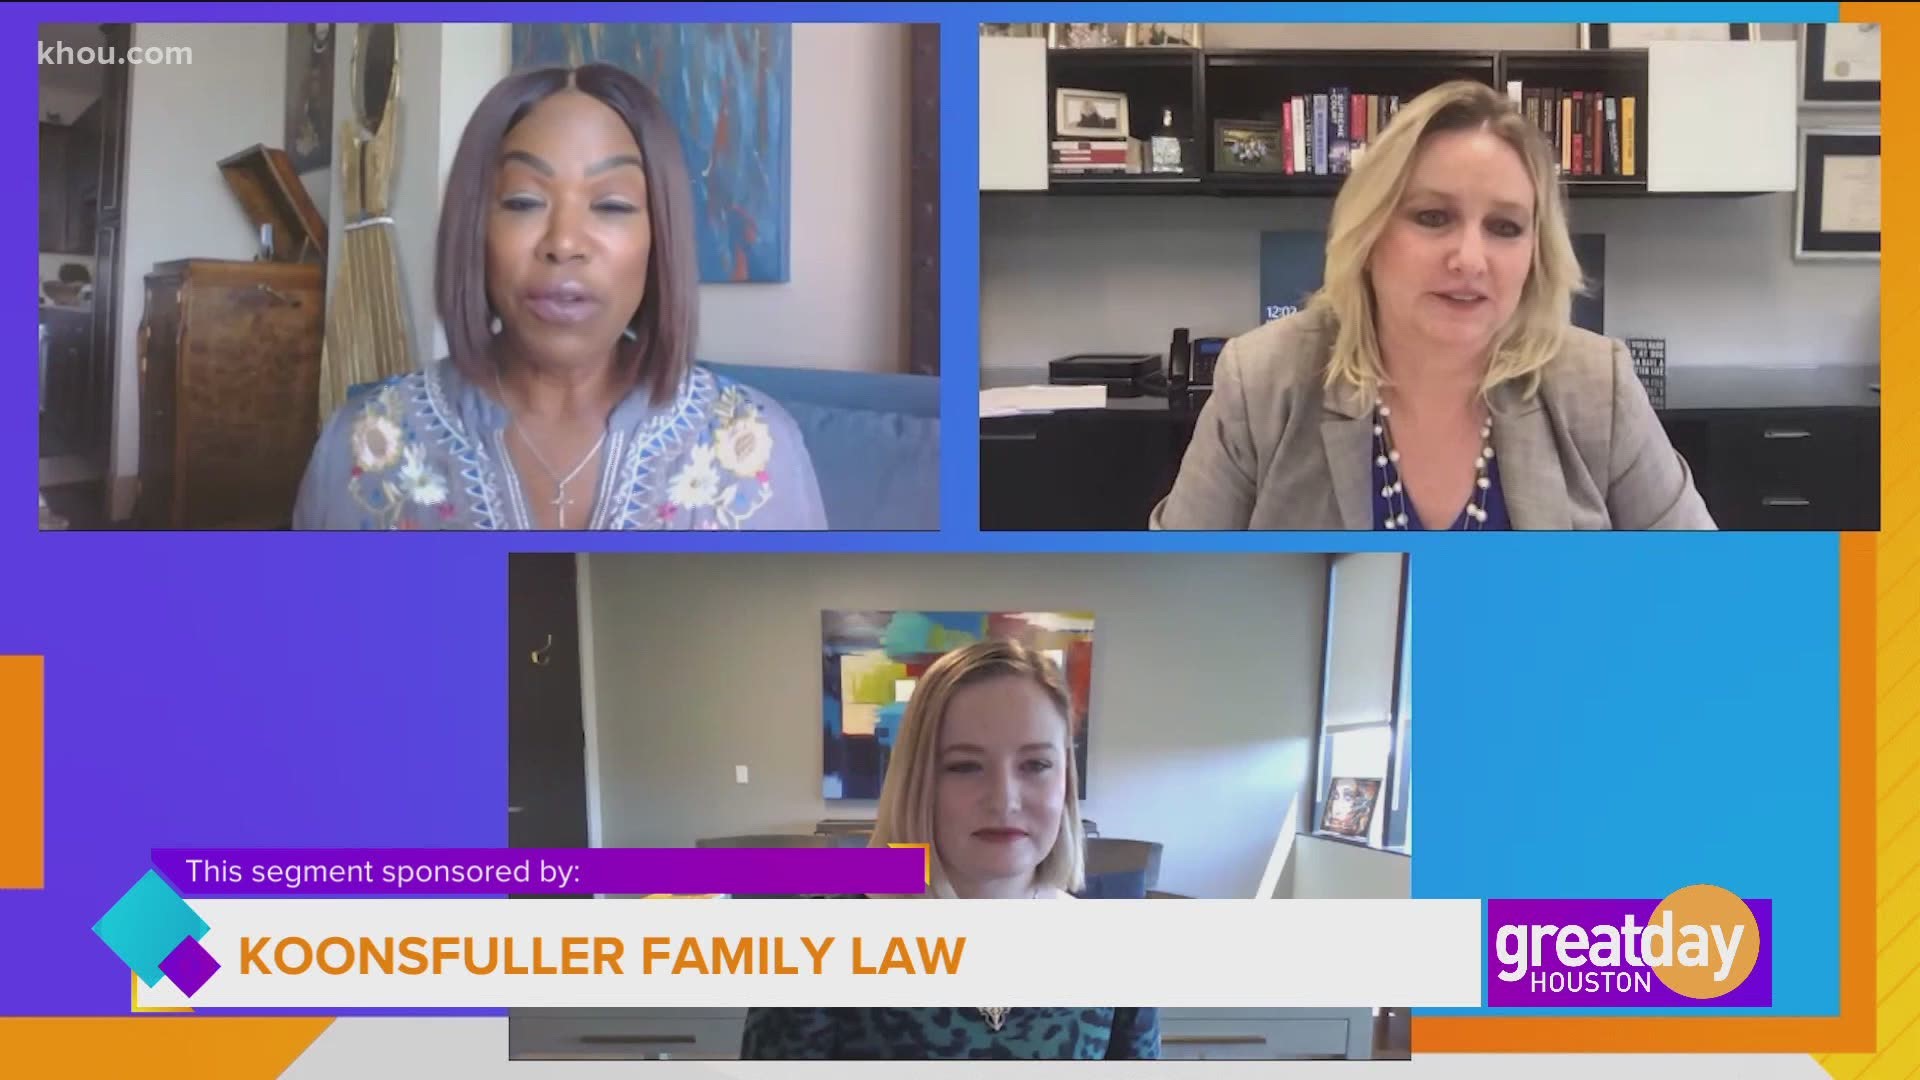 Attorneys Sherri Evans and Taylor Toombs Imel with Koonsfuller Family Law discuss divorce proceedings during a pandemic.